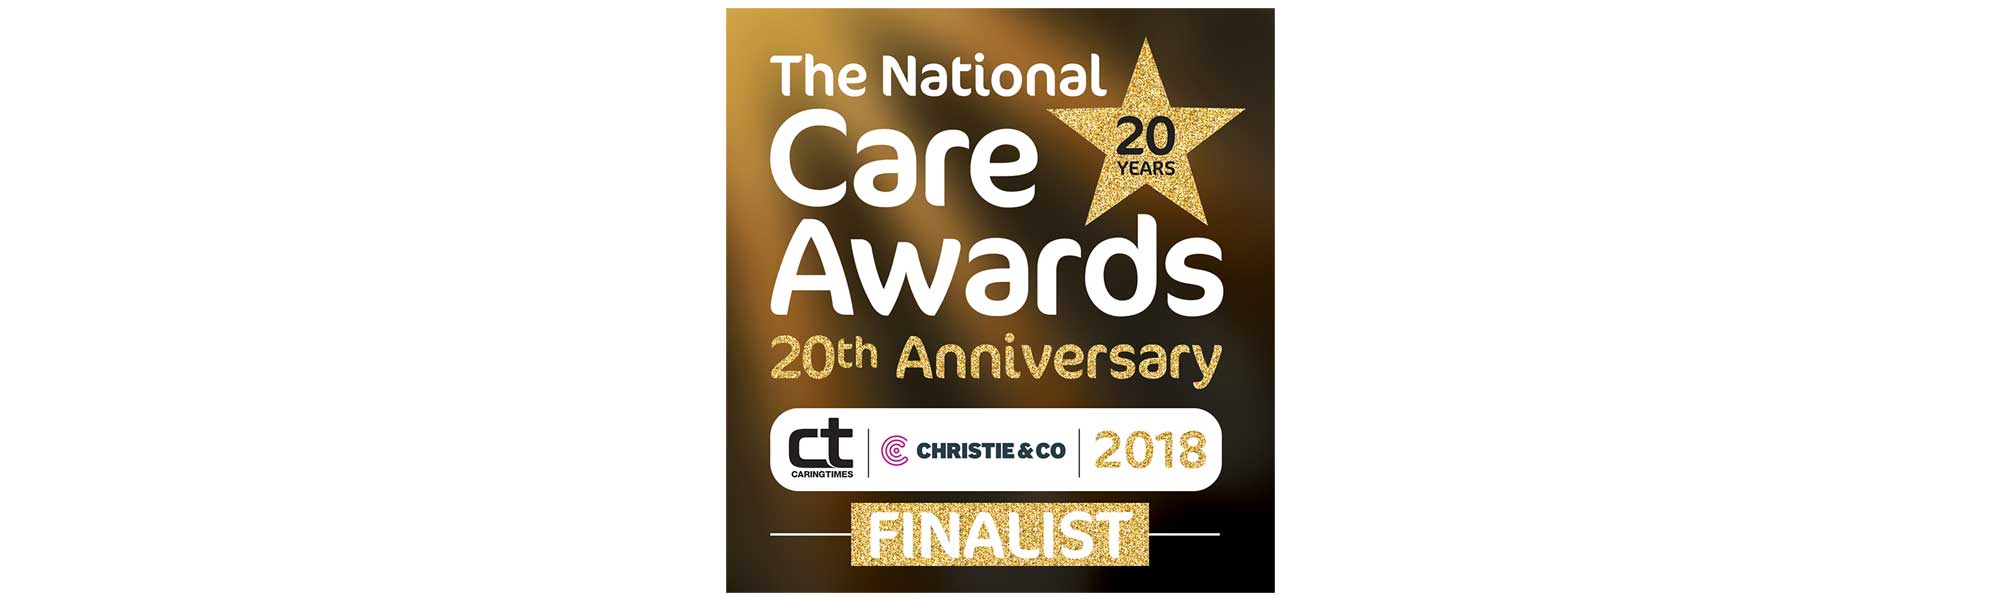 The National Care Awards Finalists shortlisted avery healthcare banner hero